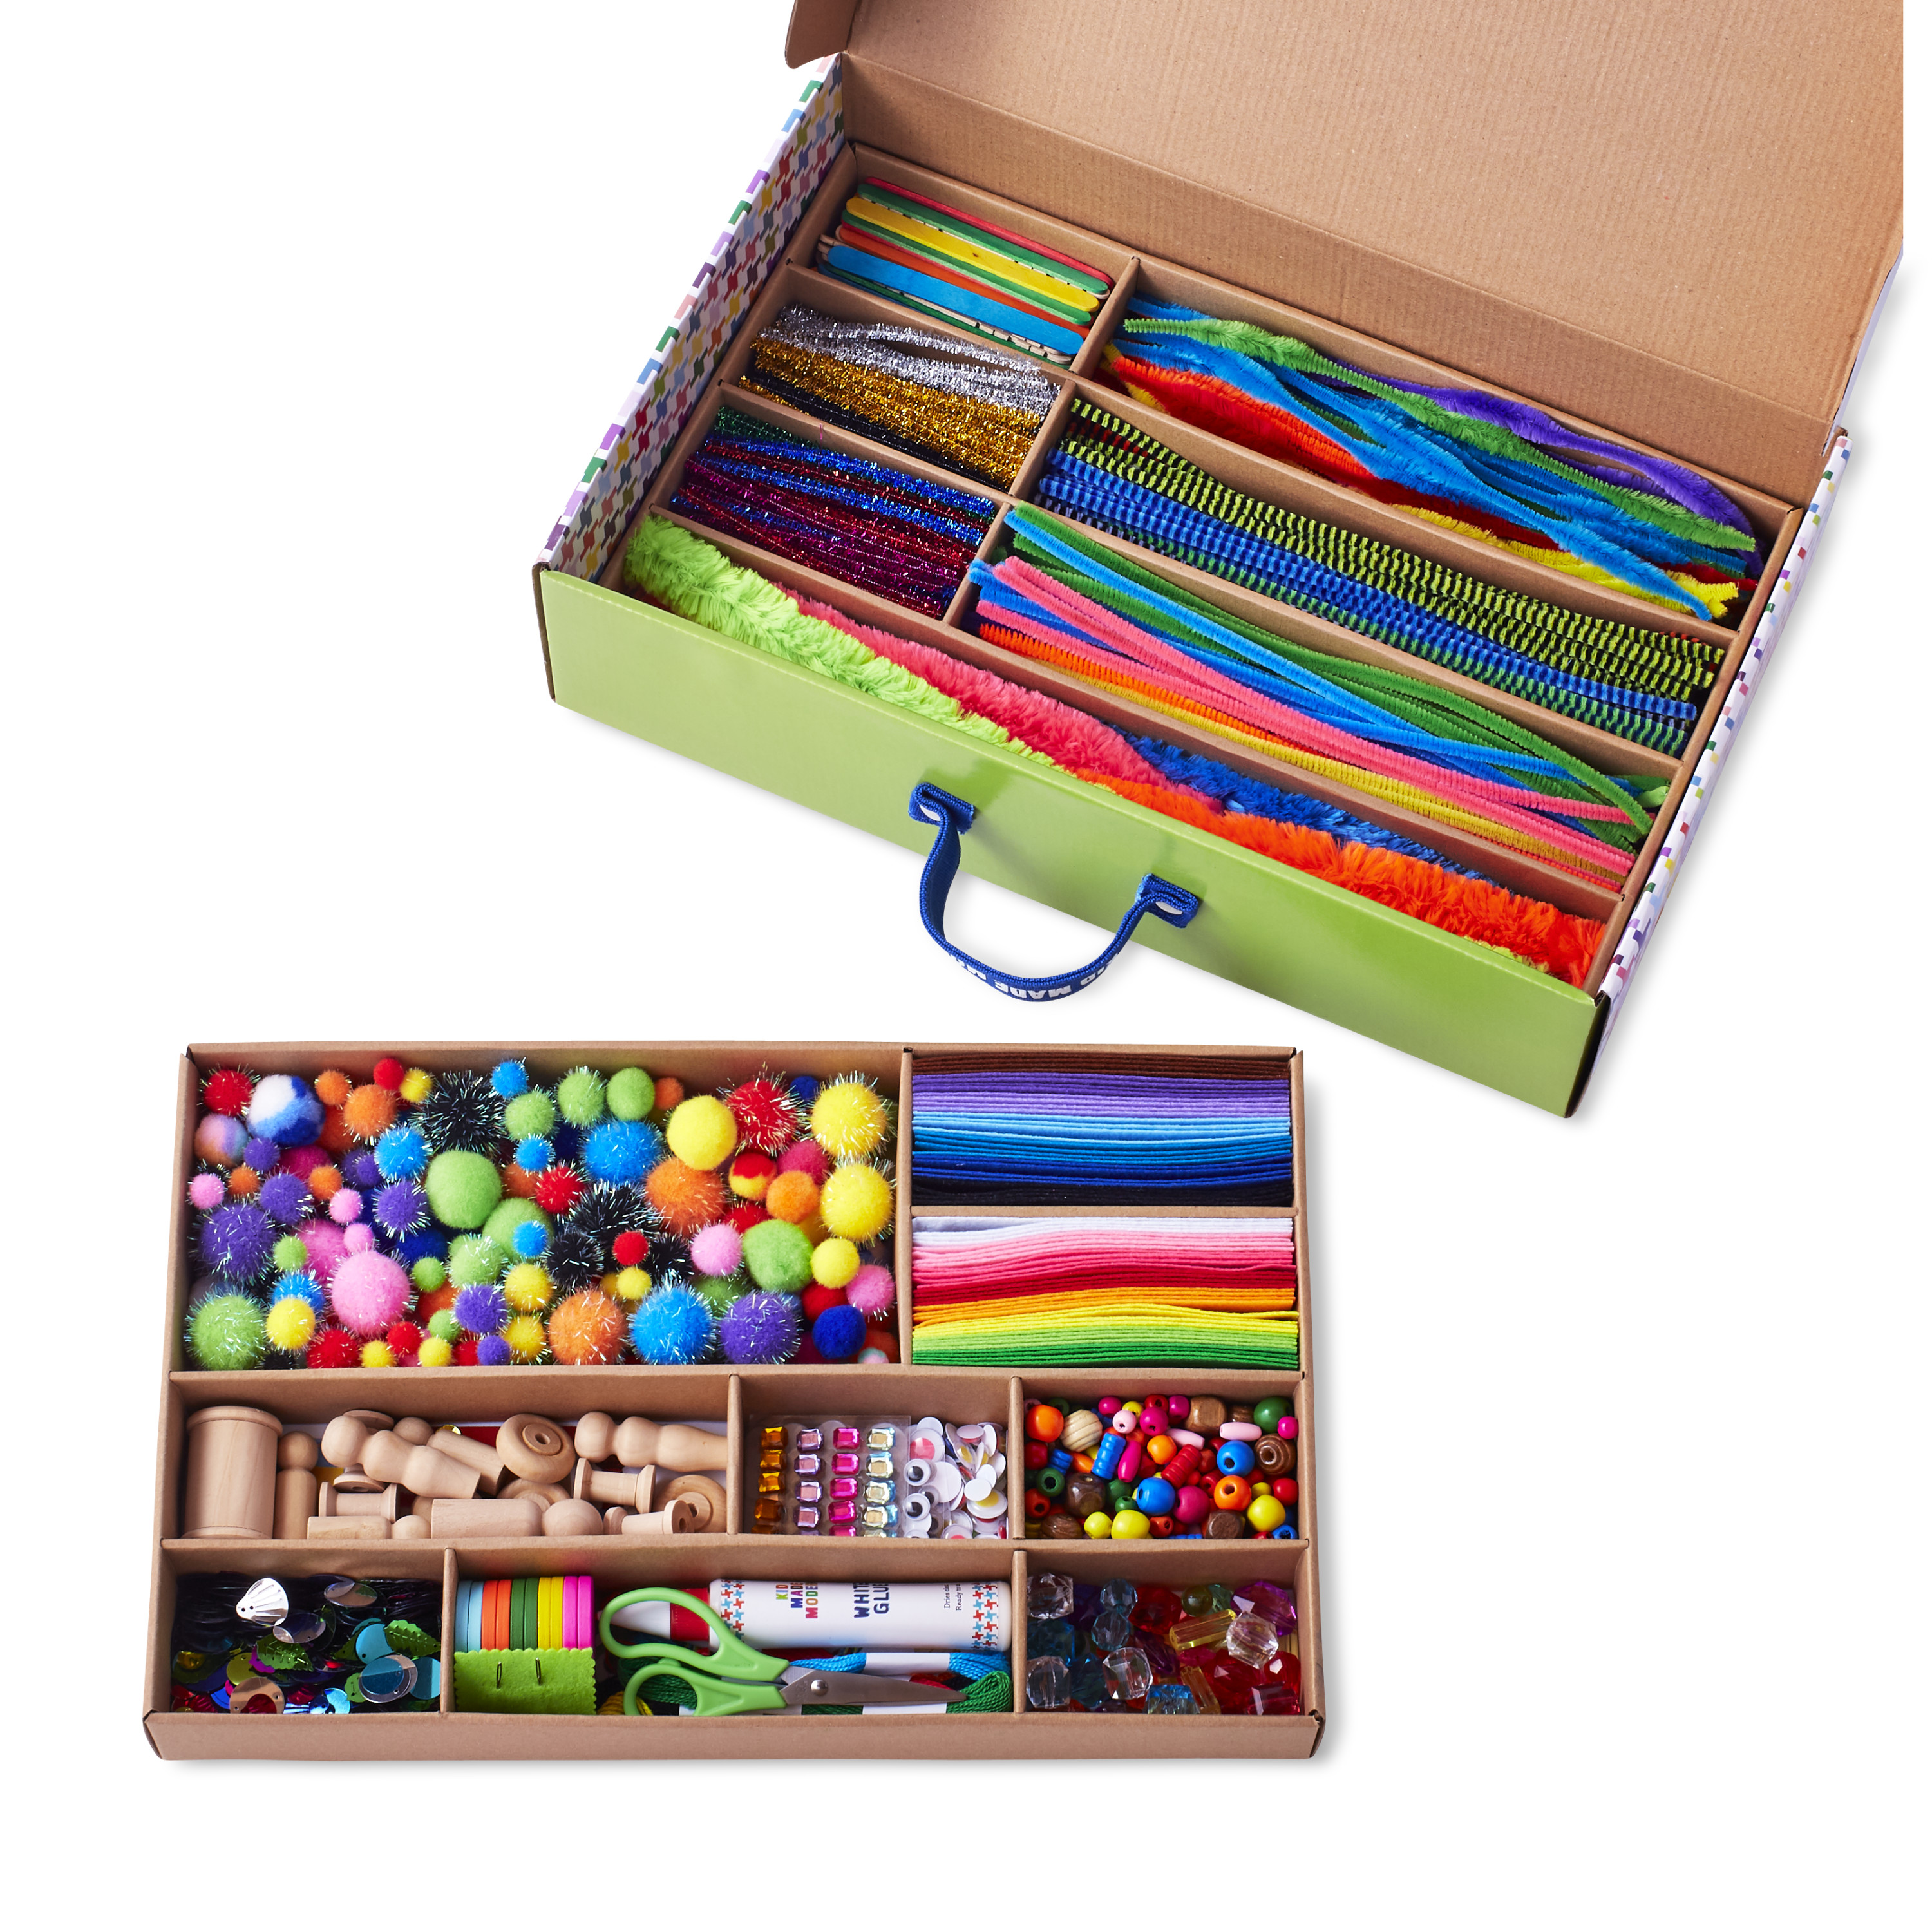 Kid Made Modern Arts and Crafts Library - Craft Set for Kids Ages 6 and Up - image 4 of 5